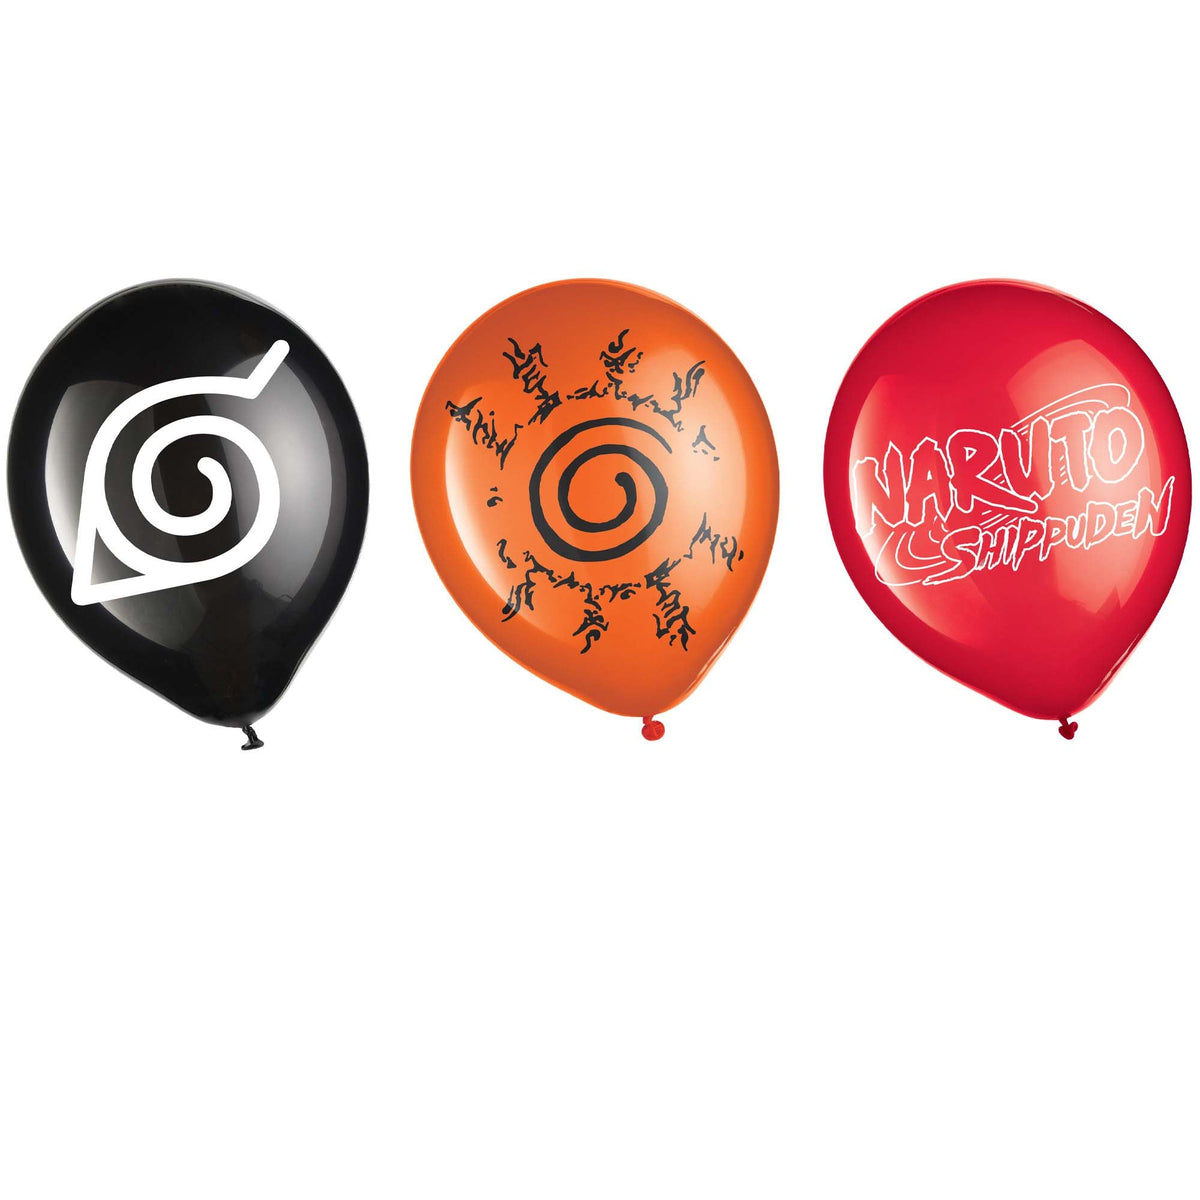 AMSCAN CA Kids Birthday Naruto Printed Latex Balloons, Black, Orange, Red, 12 Inches, 6 Count